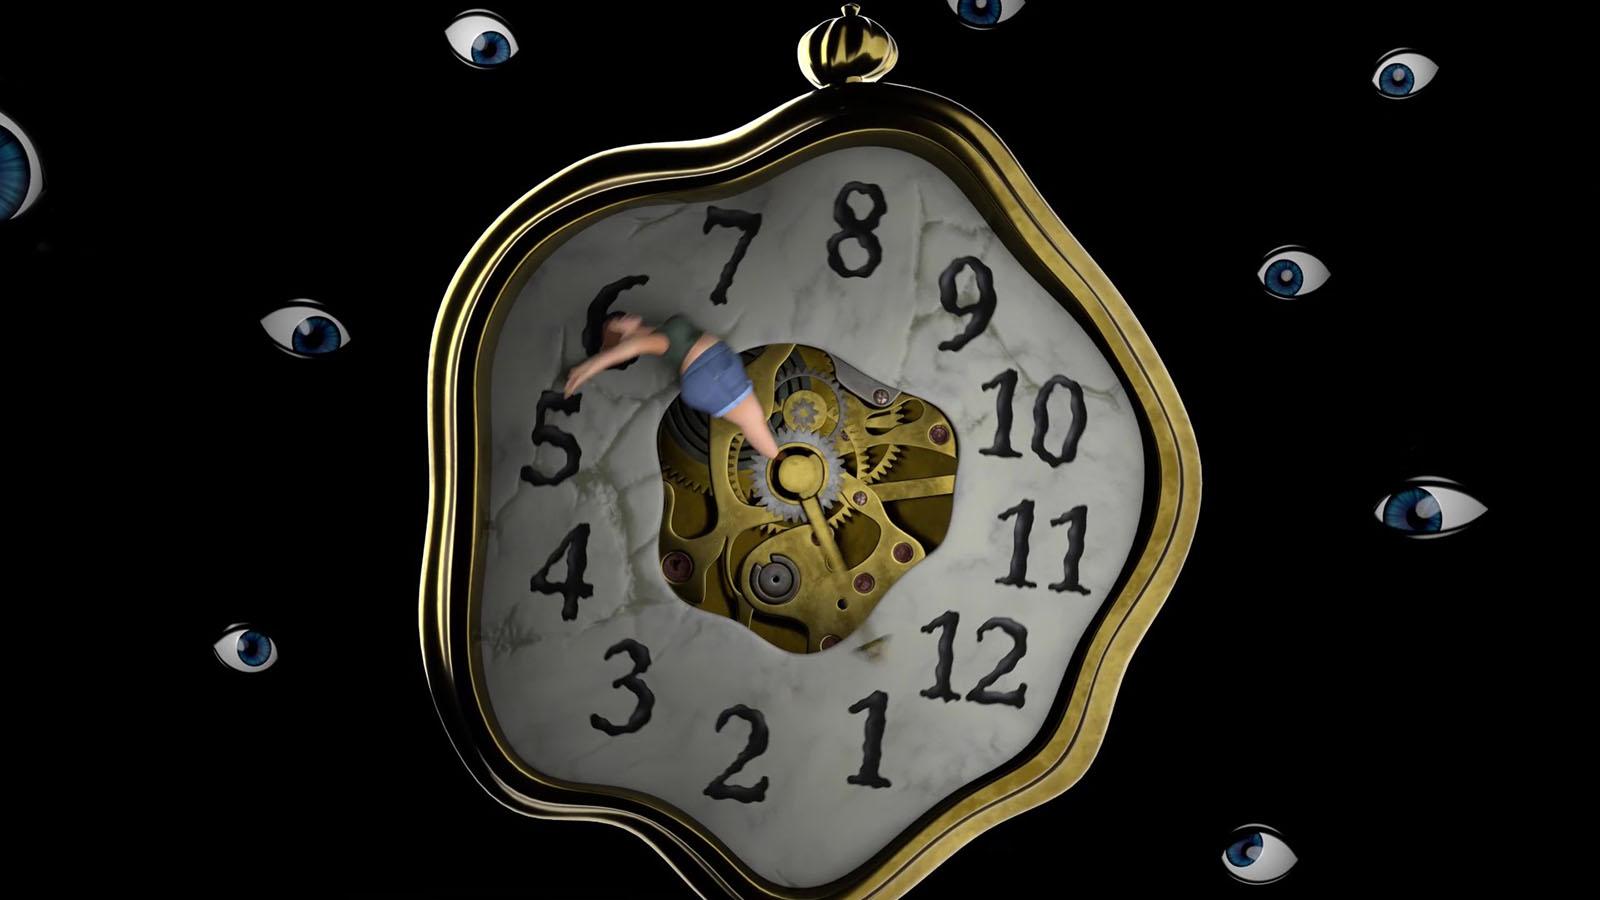 Distorted clock surrounded by darkness and eyeballs